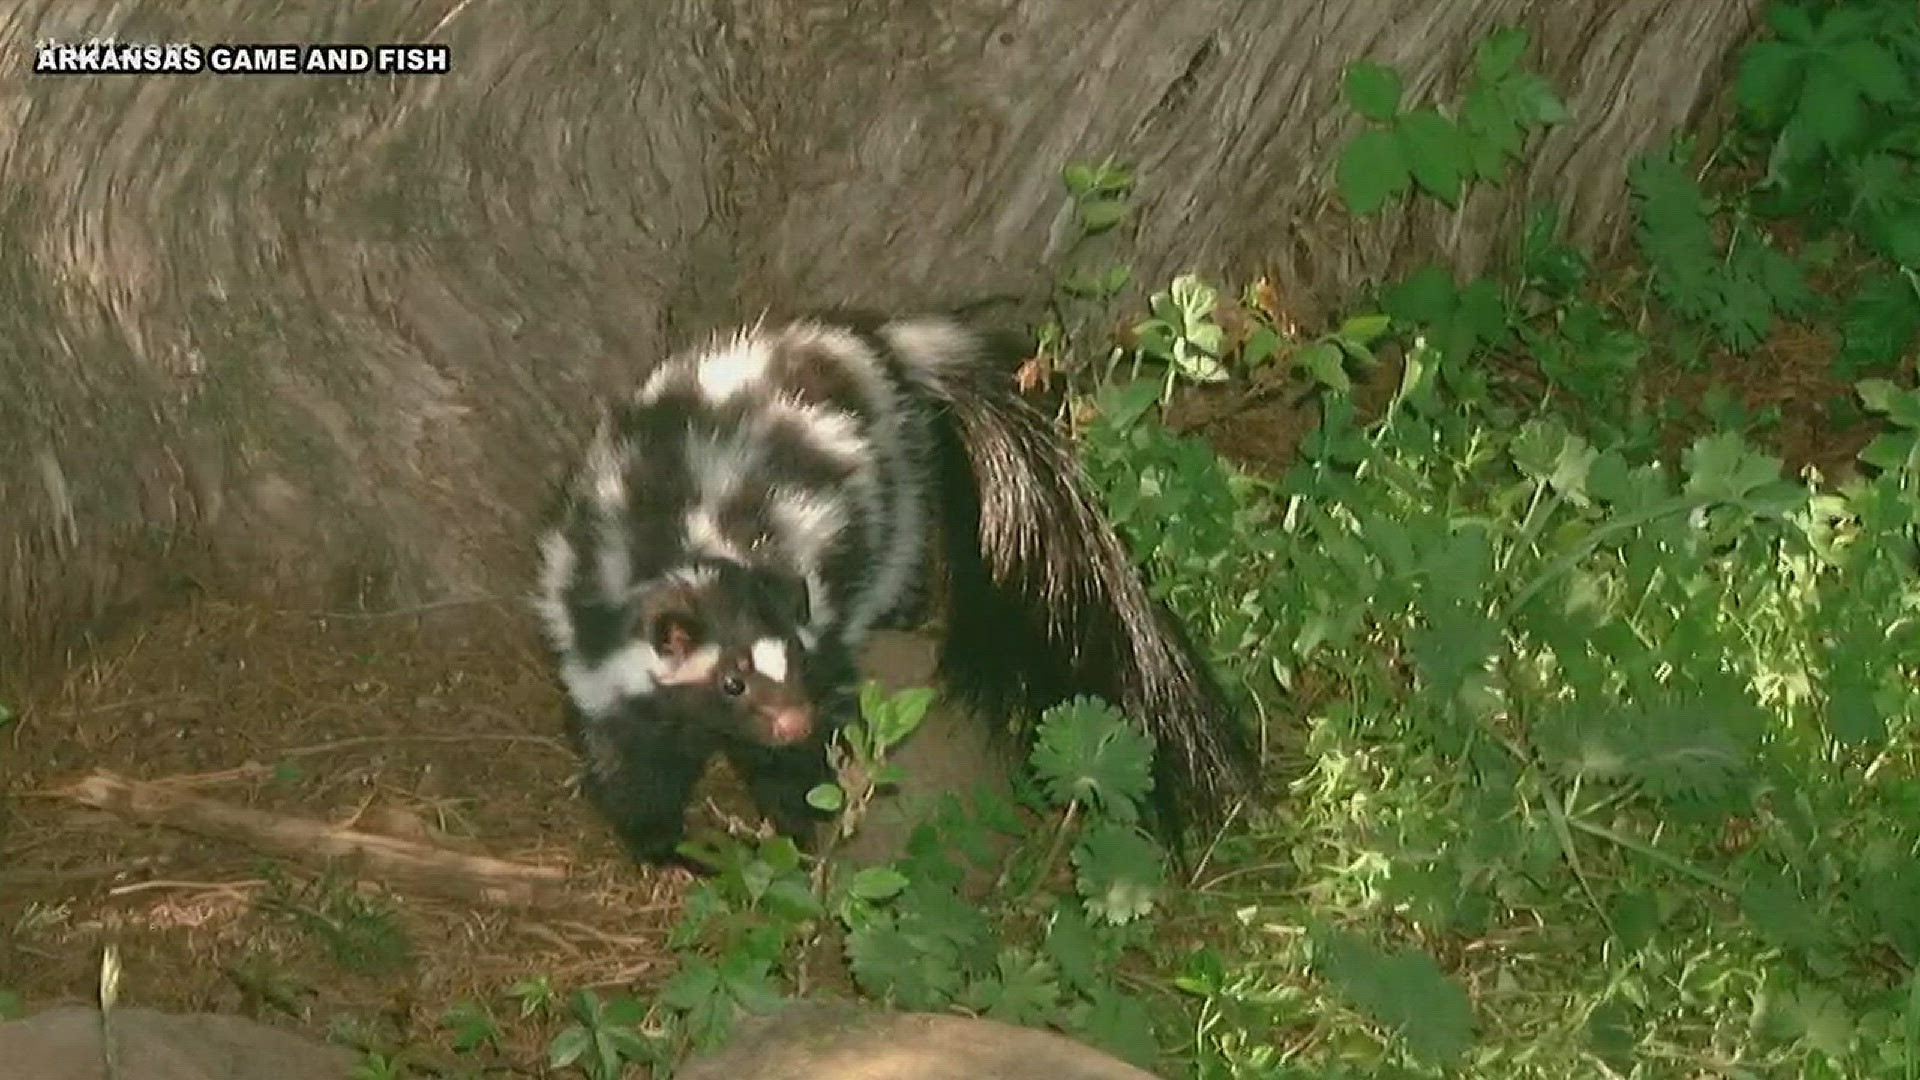 Arkansas Game and Fish needs your help finding the rare spotted skunk, the handstand sporting species that has made waves in viral social media videos.